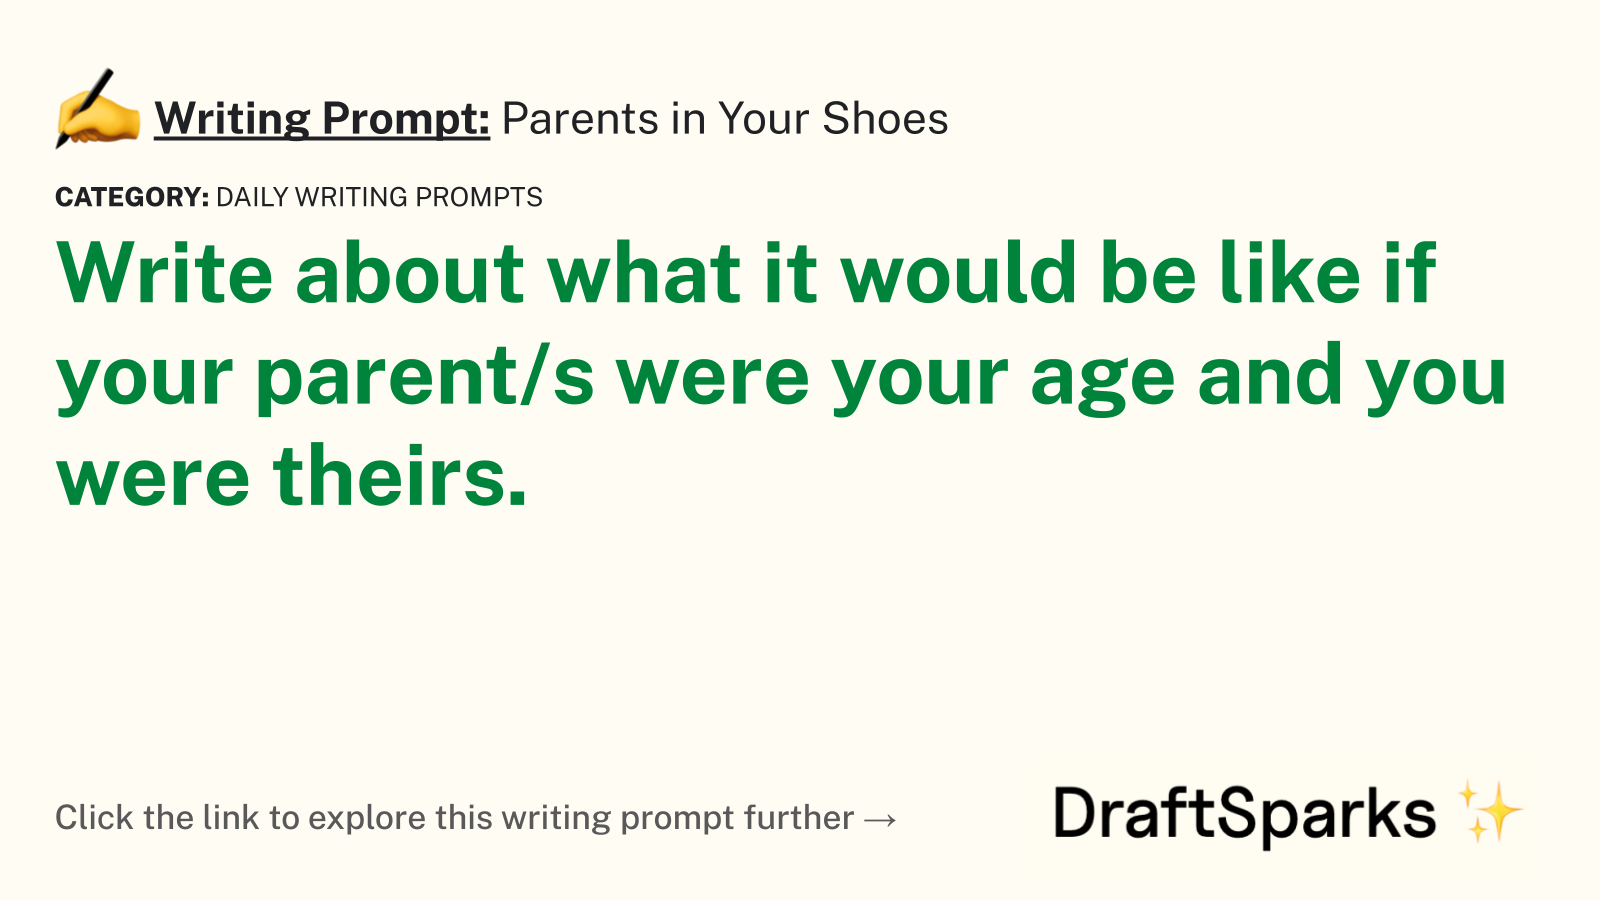 Parents in Your Shoes